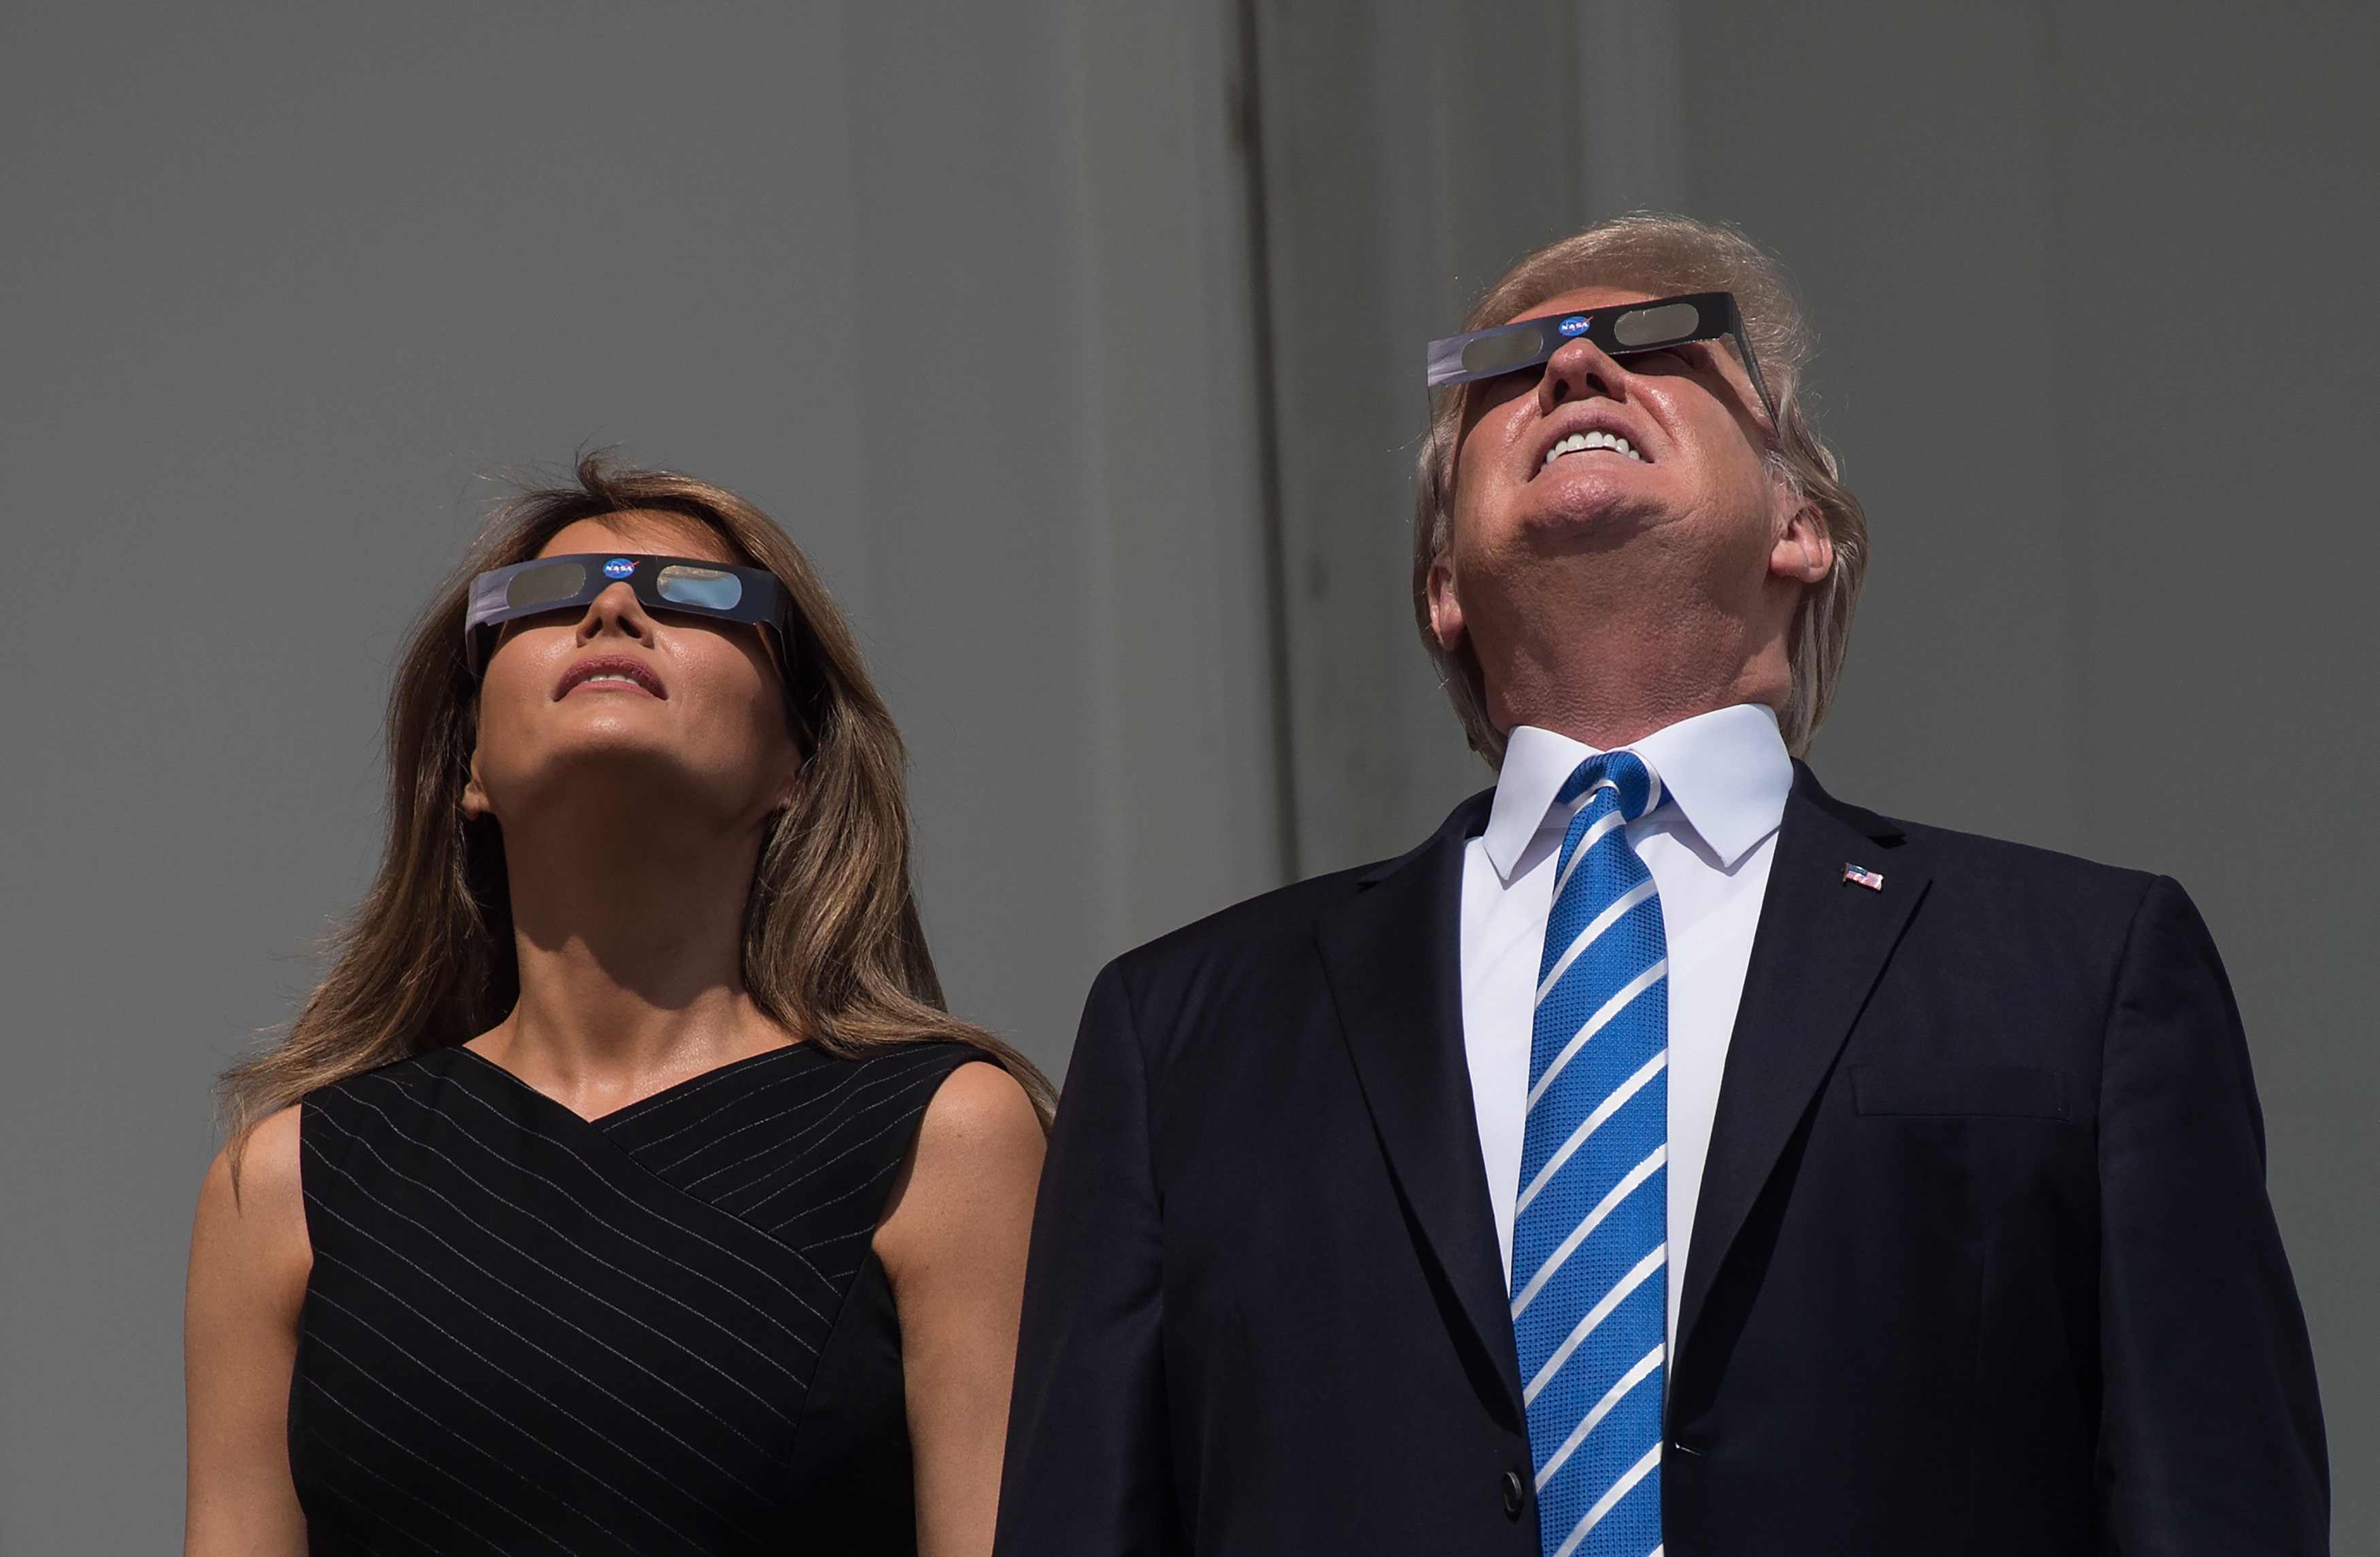 US President Donald Trump and First Lady Melania Trump look up at the partial solar eclipse from the balcony of the White House in Washington, DC, on August 21, 2017. / AFP PHOTO / NICHOLAS KAMM